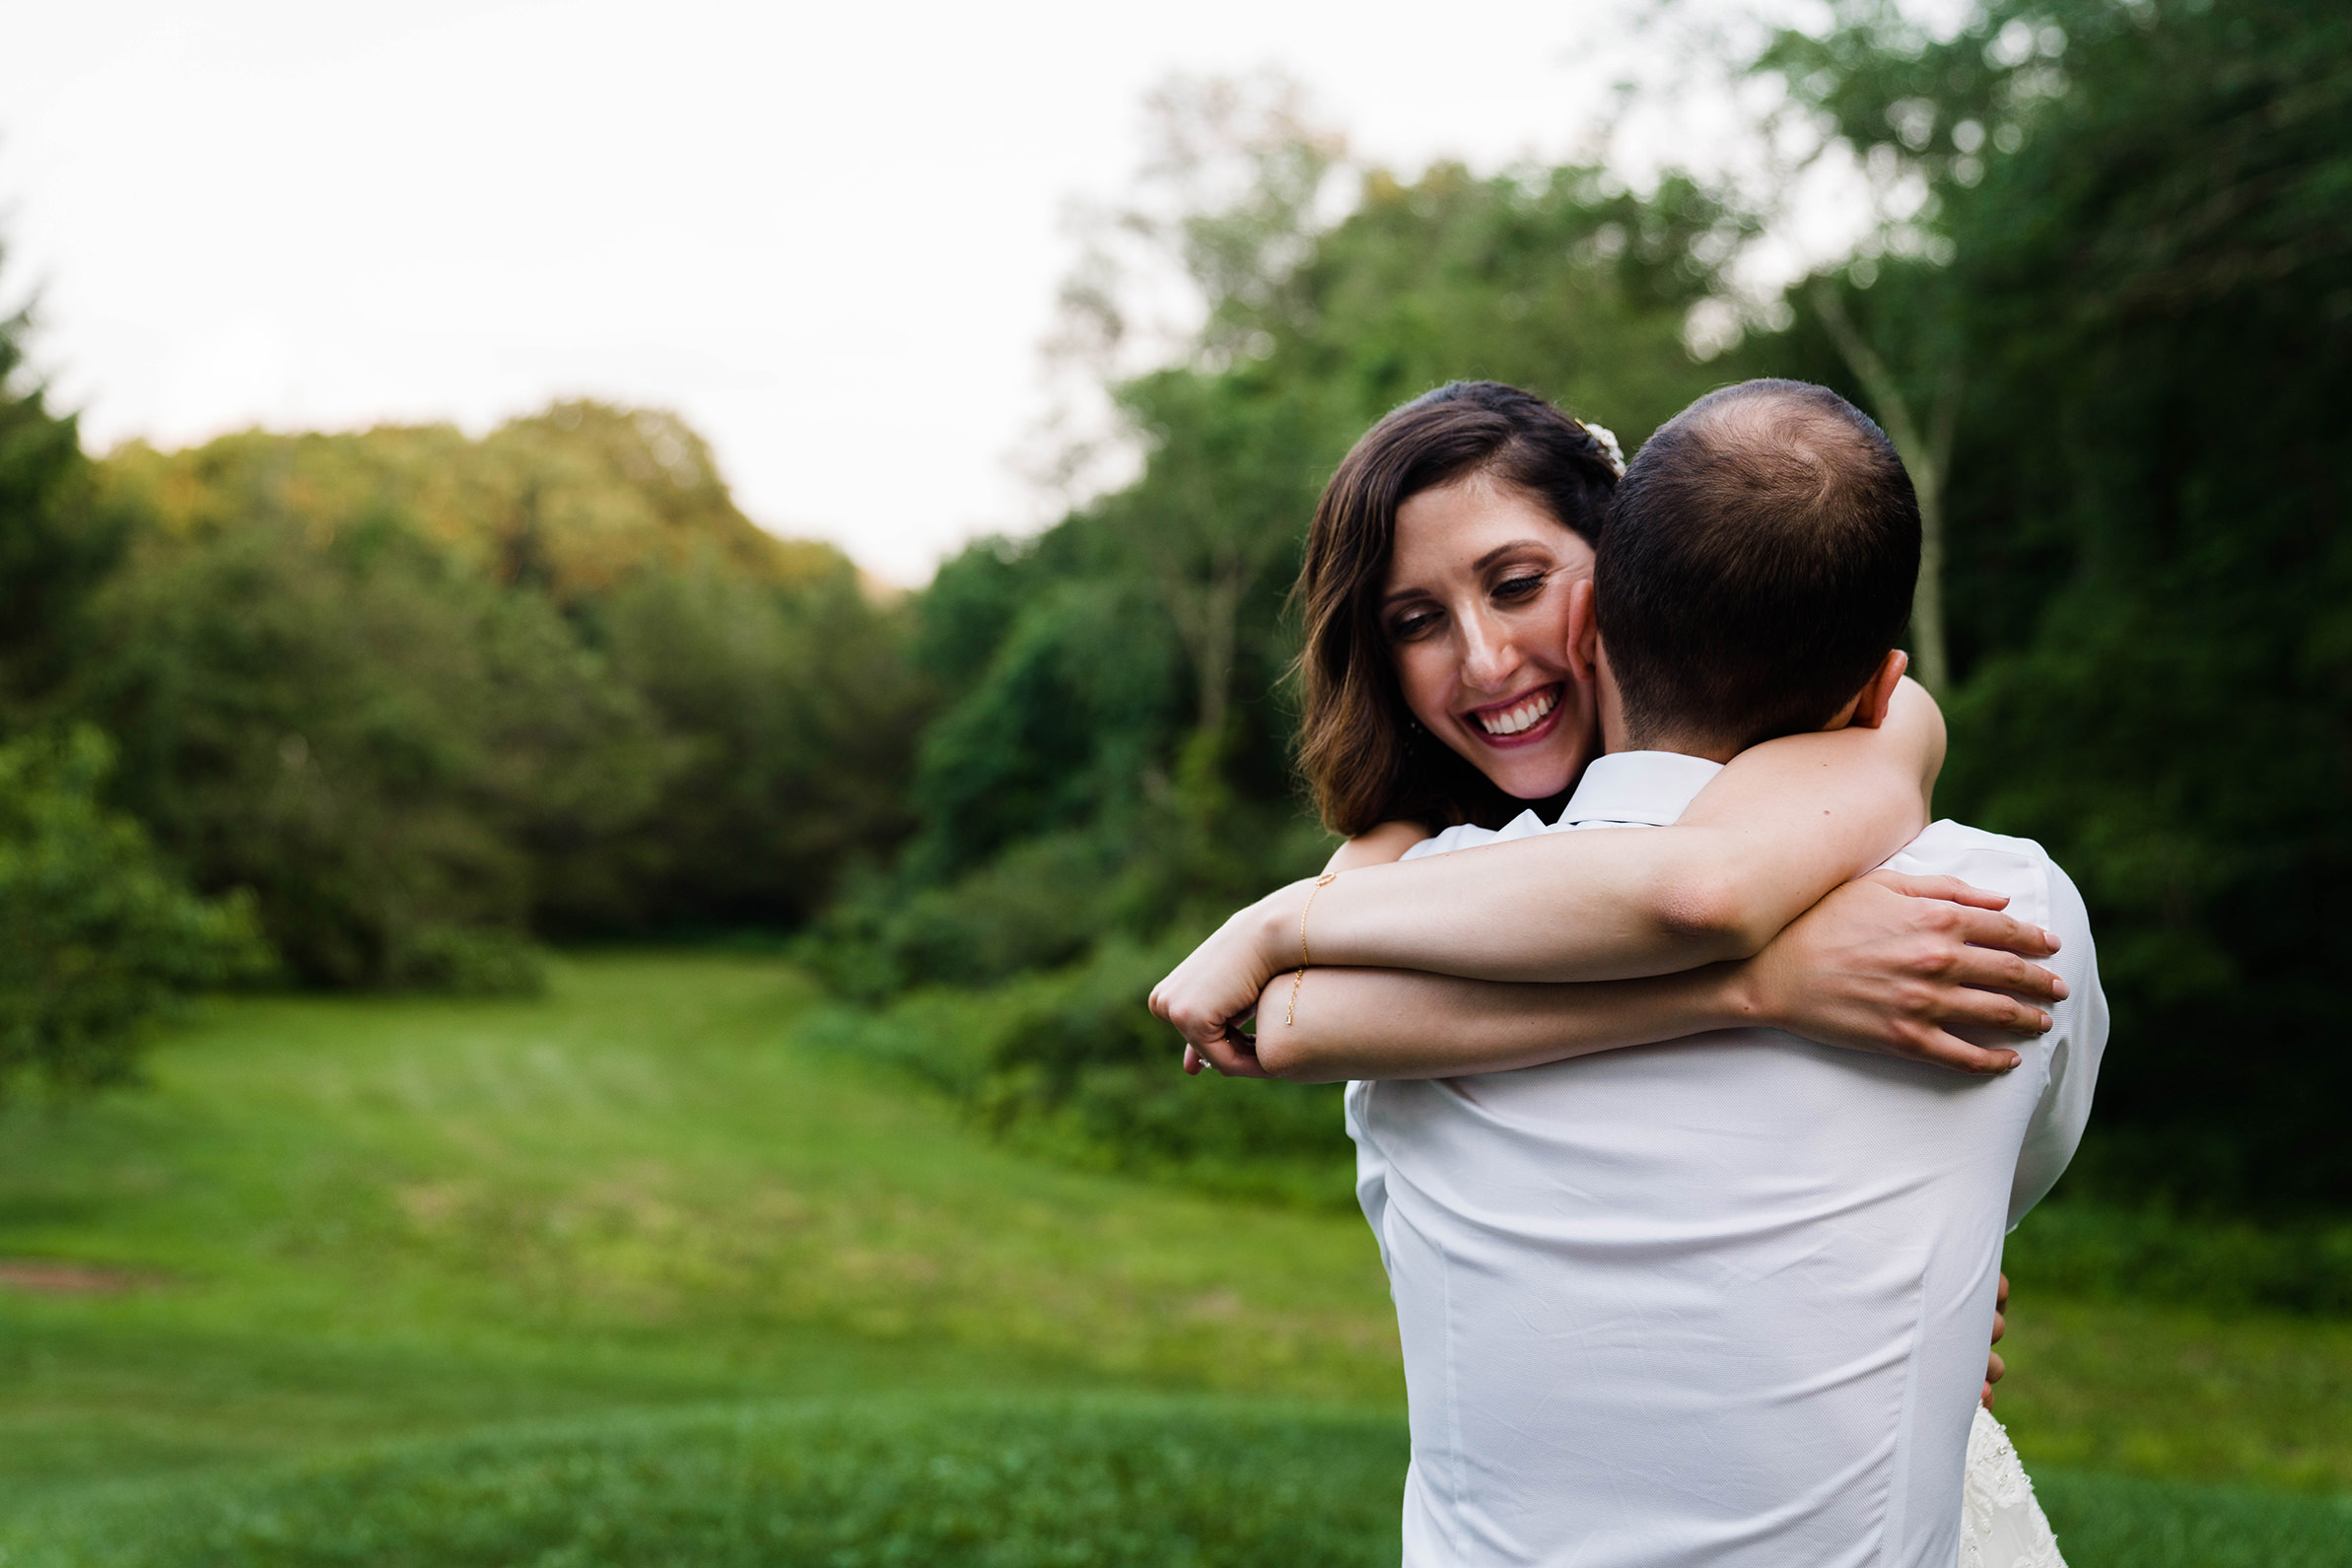 A documentary photograph featured in the best of wedding photography of 2019 showing a bride hugging her groom